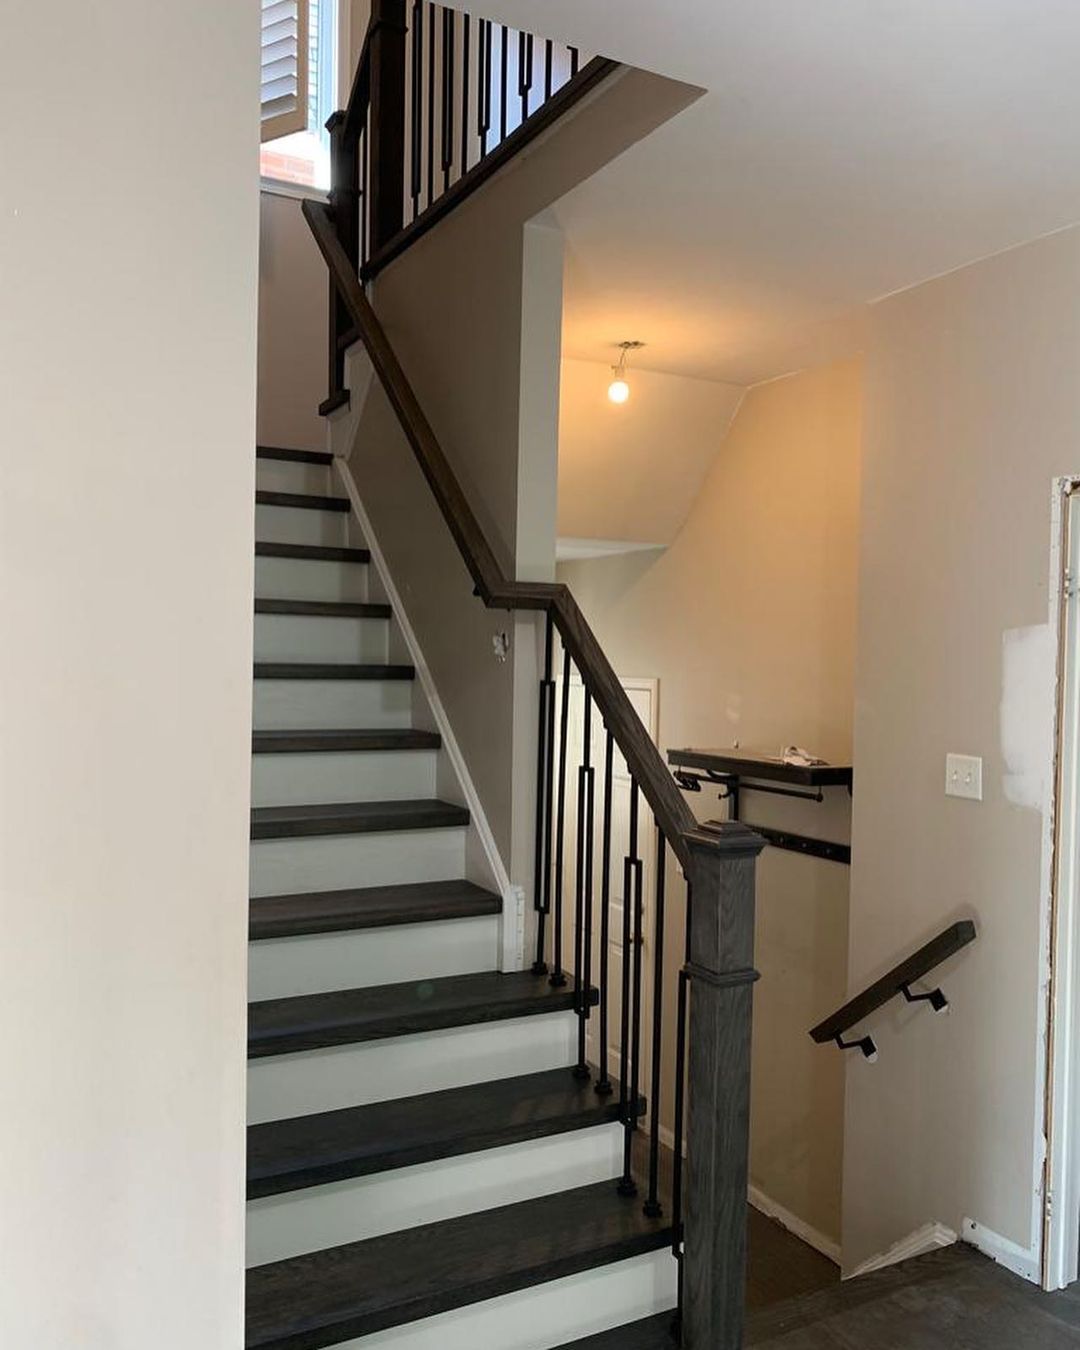 Renovation of wooden flooring and stair railings